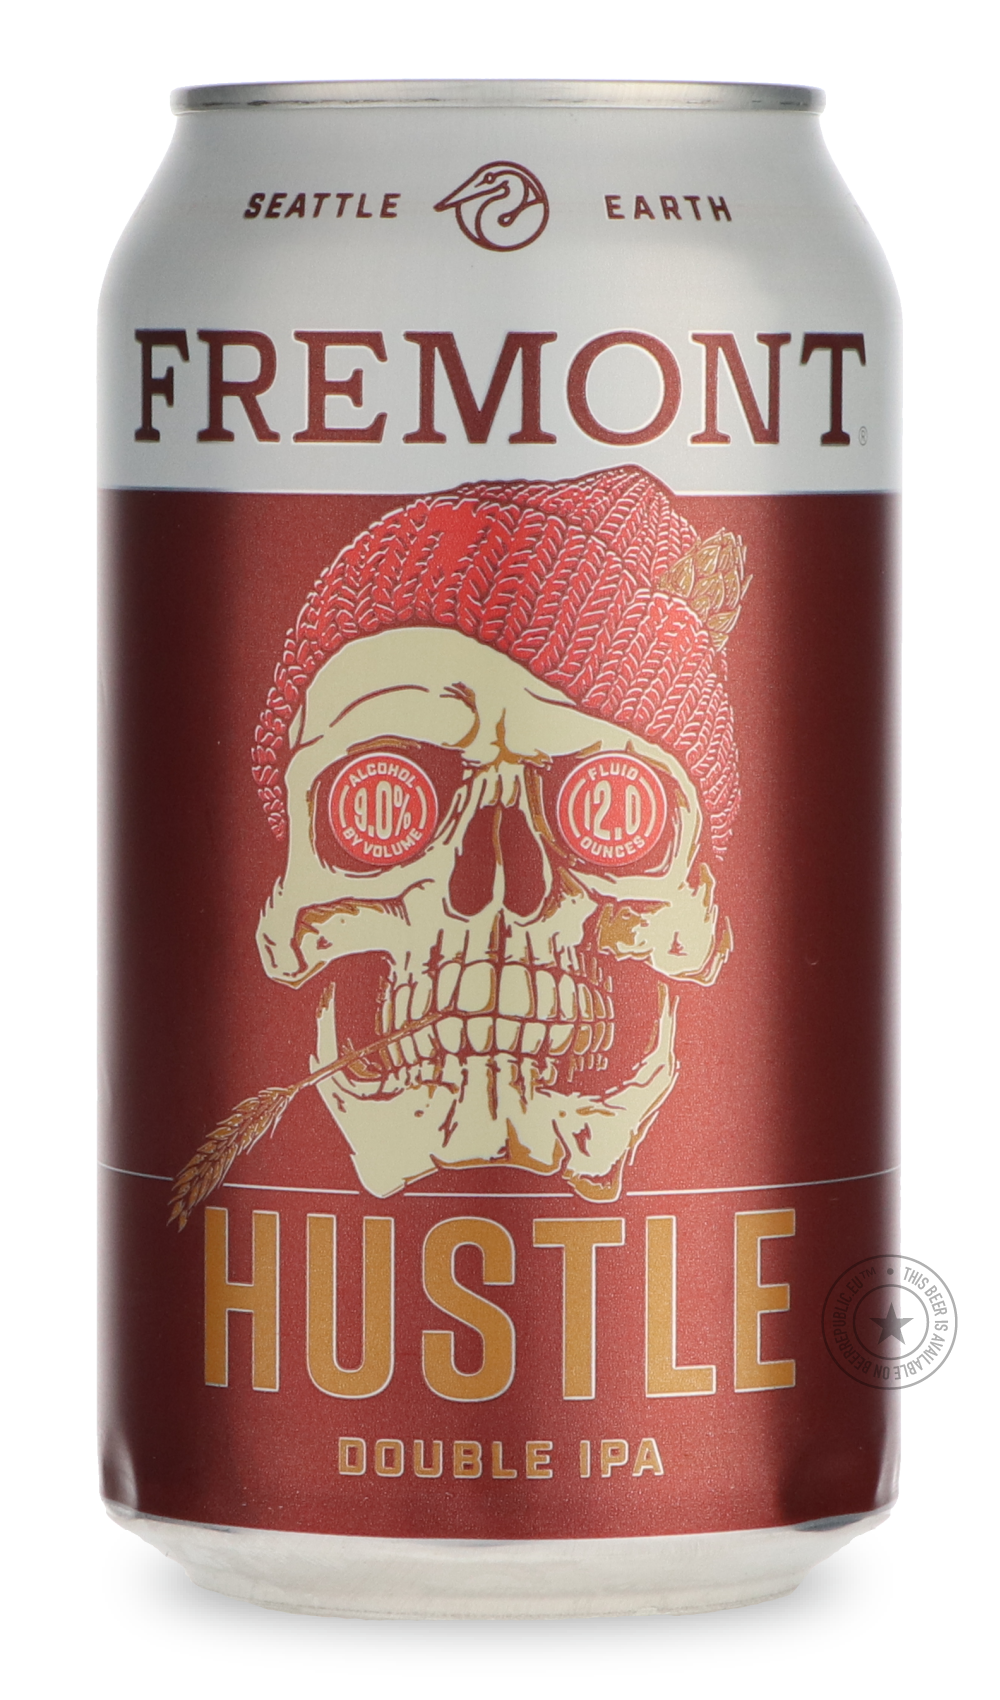 -Fremont- Hustle-IPA- Only @ Beer Republic - The best online beer store for American & Canadian craft beer - Buy beer online from the USA and Canada - Bier online kopen - Amerikaans bier kopen - Craft beer store - Craft beer kopen - Amerikanisch bier kaufen - Bier online kaufen - Acheter biere online - IPA - Stout - Porter - New England IPA - Hazy IPA - Imperial Stout - Barrel Aged - Barrel Aged Imperial Stout - Brown - Dark beer - Blond - Blonde - Pilsner - Lager - Wheat - Weizen - Amber - Barley Wine - Qu